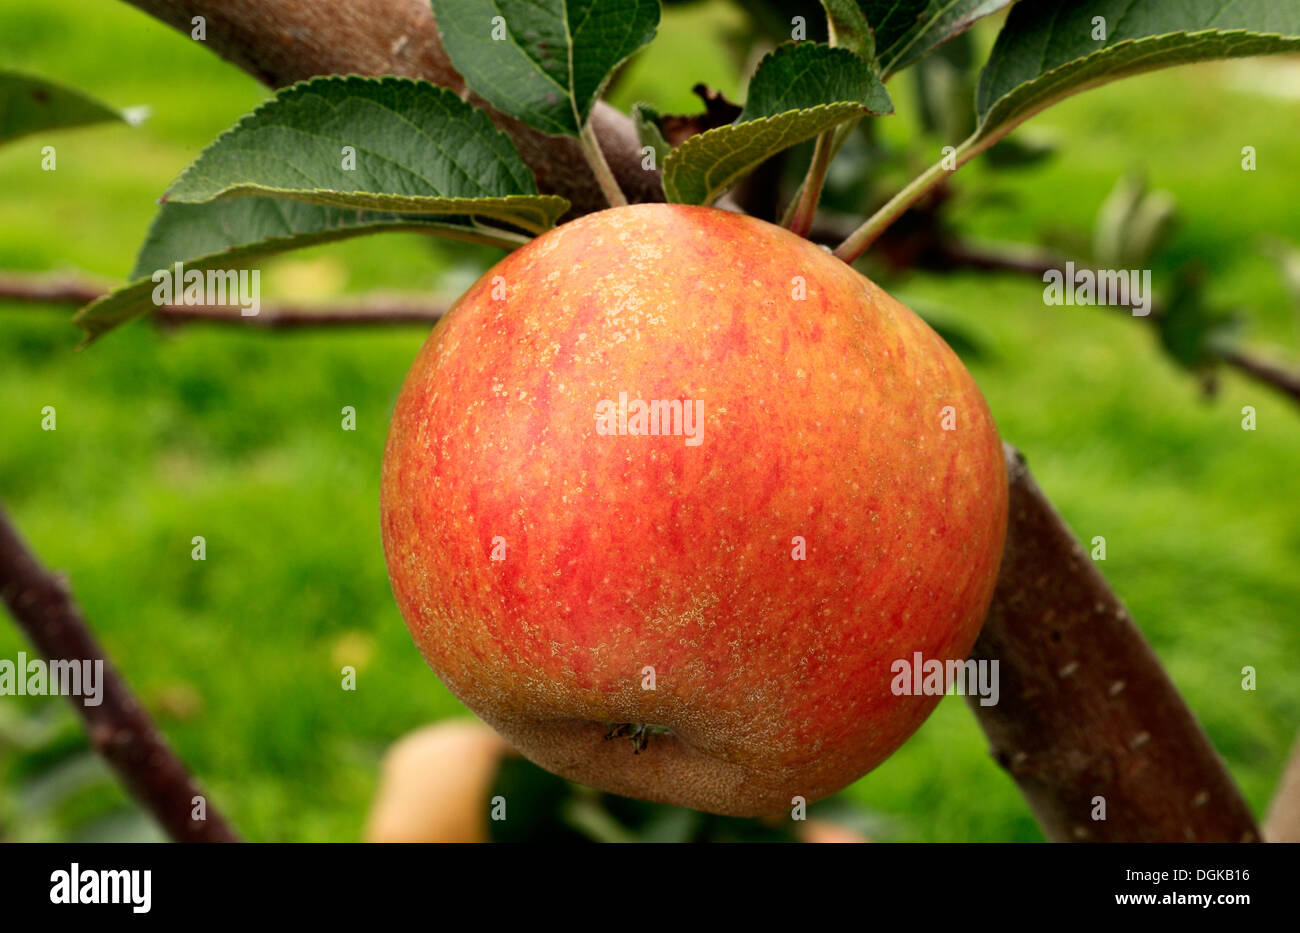 Apple 'Ashmead's Kernel',  malus domestica, apples, named variety varieties growing on tree Stock Photo